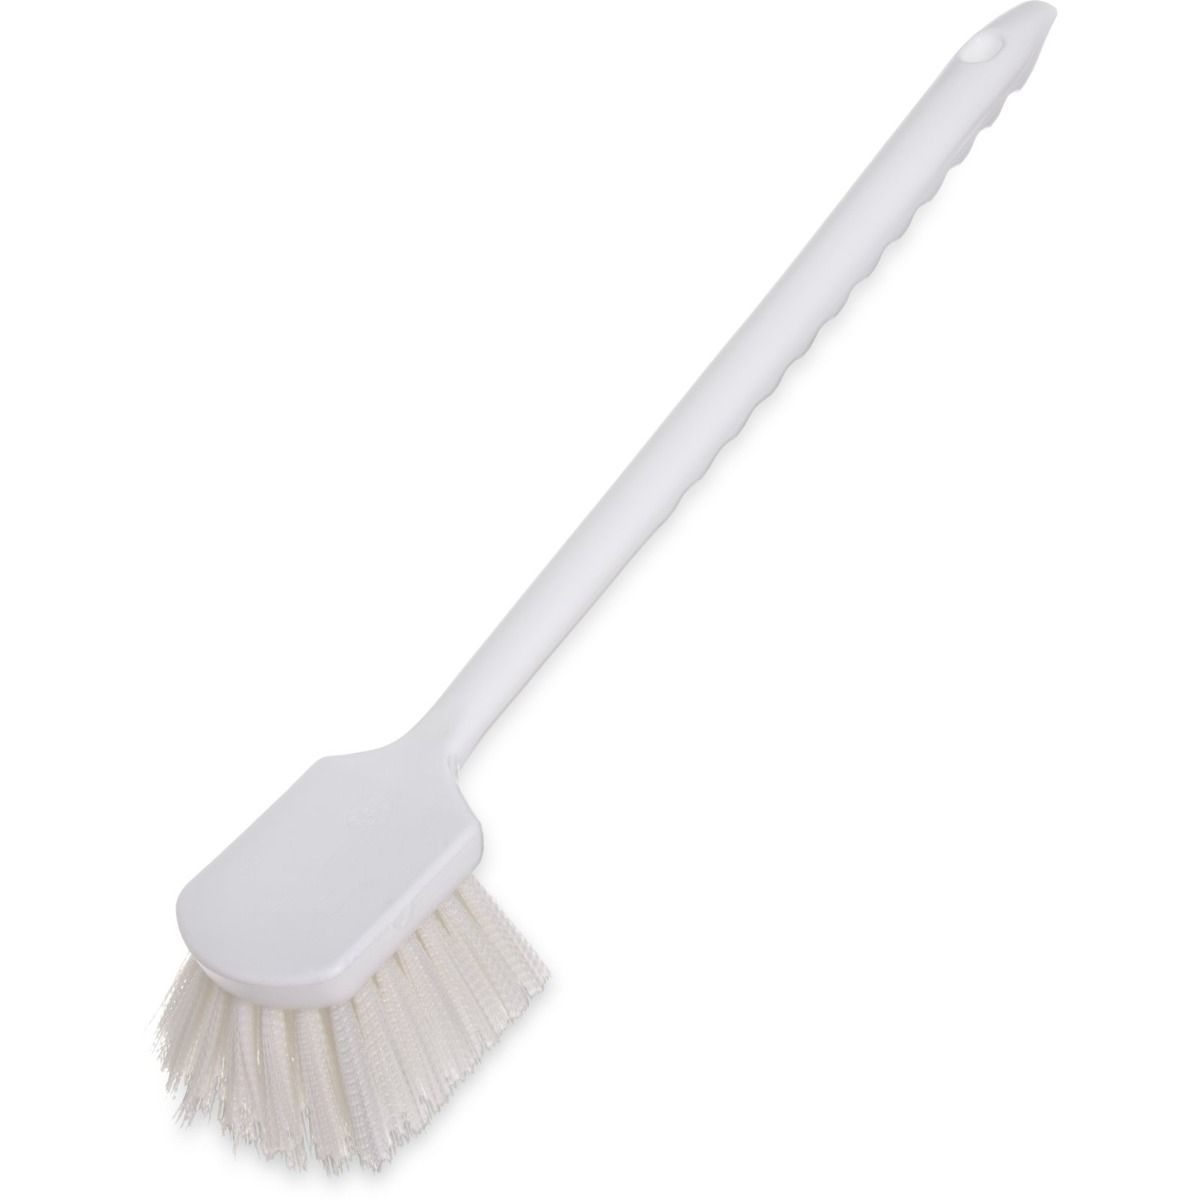 Small Cleaning Brush Kit – Aspen Surgical